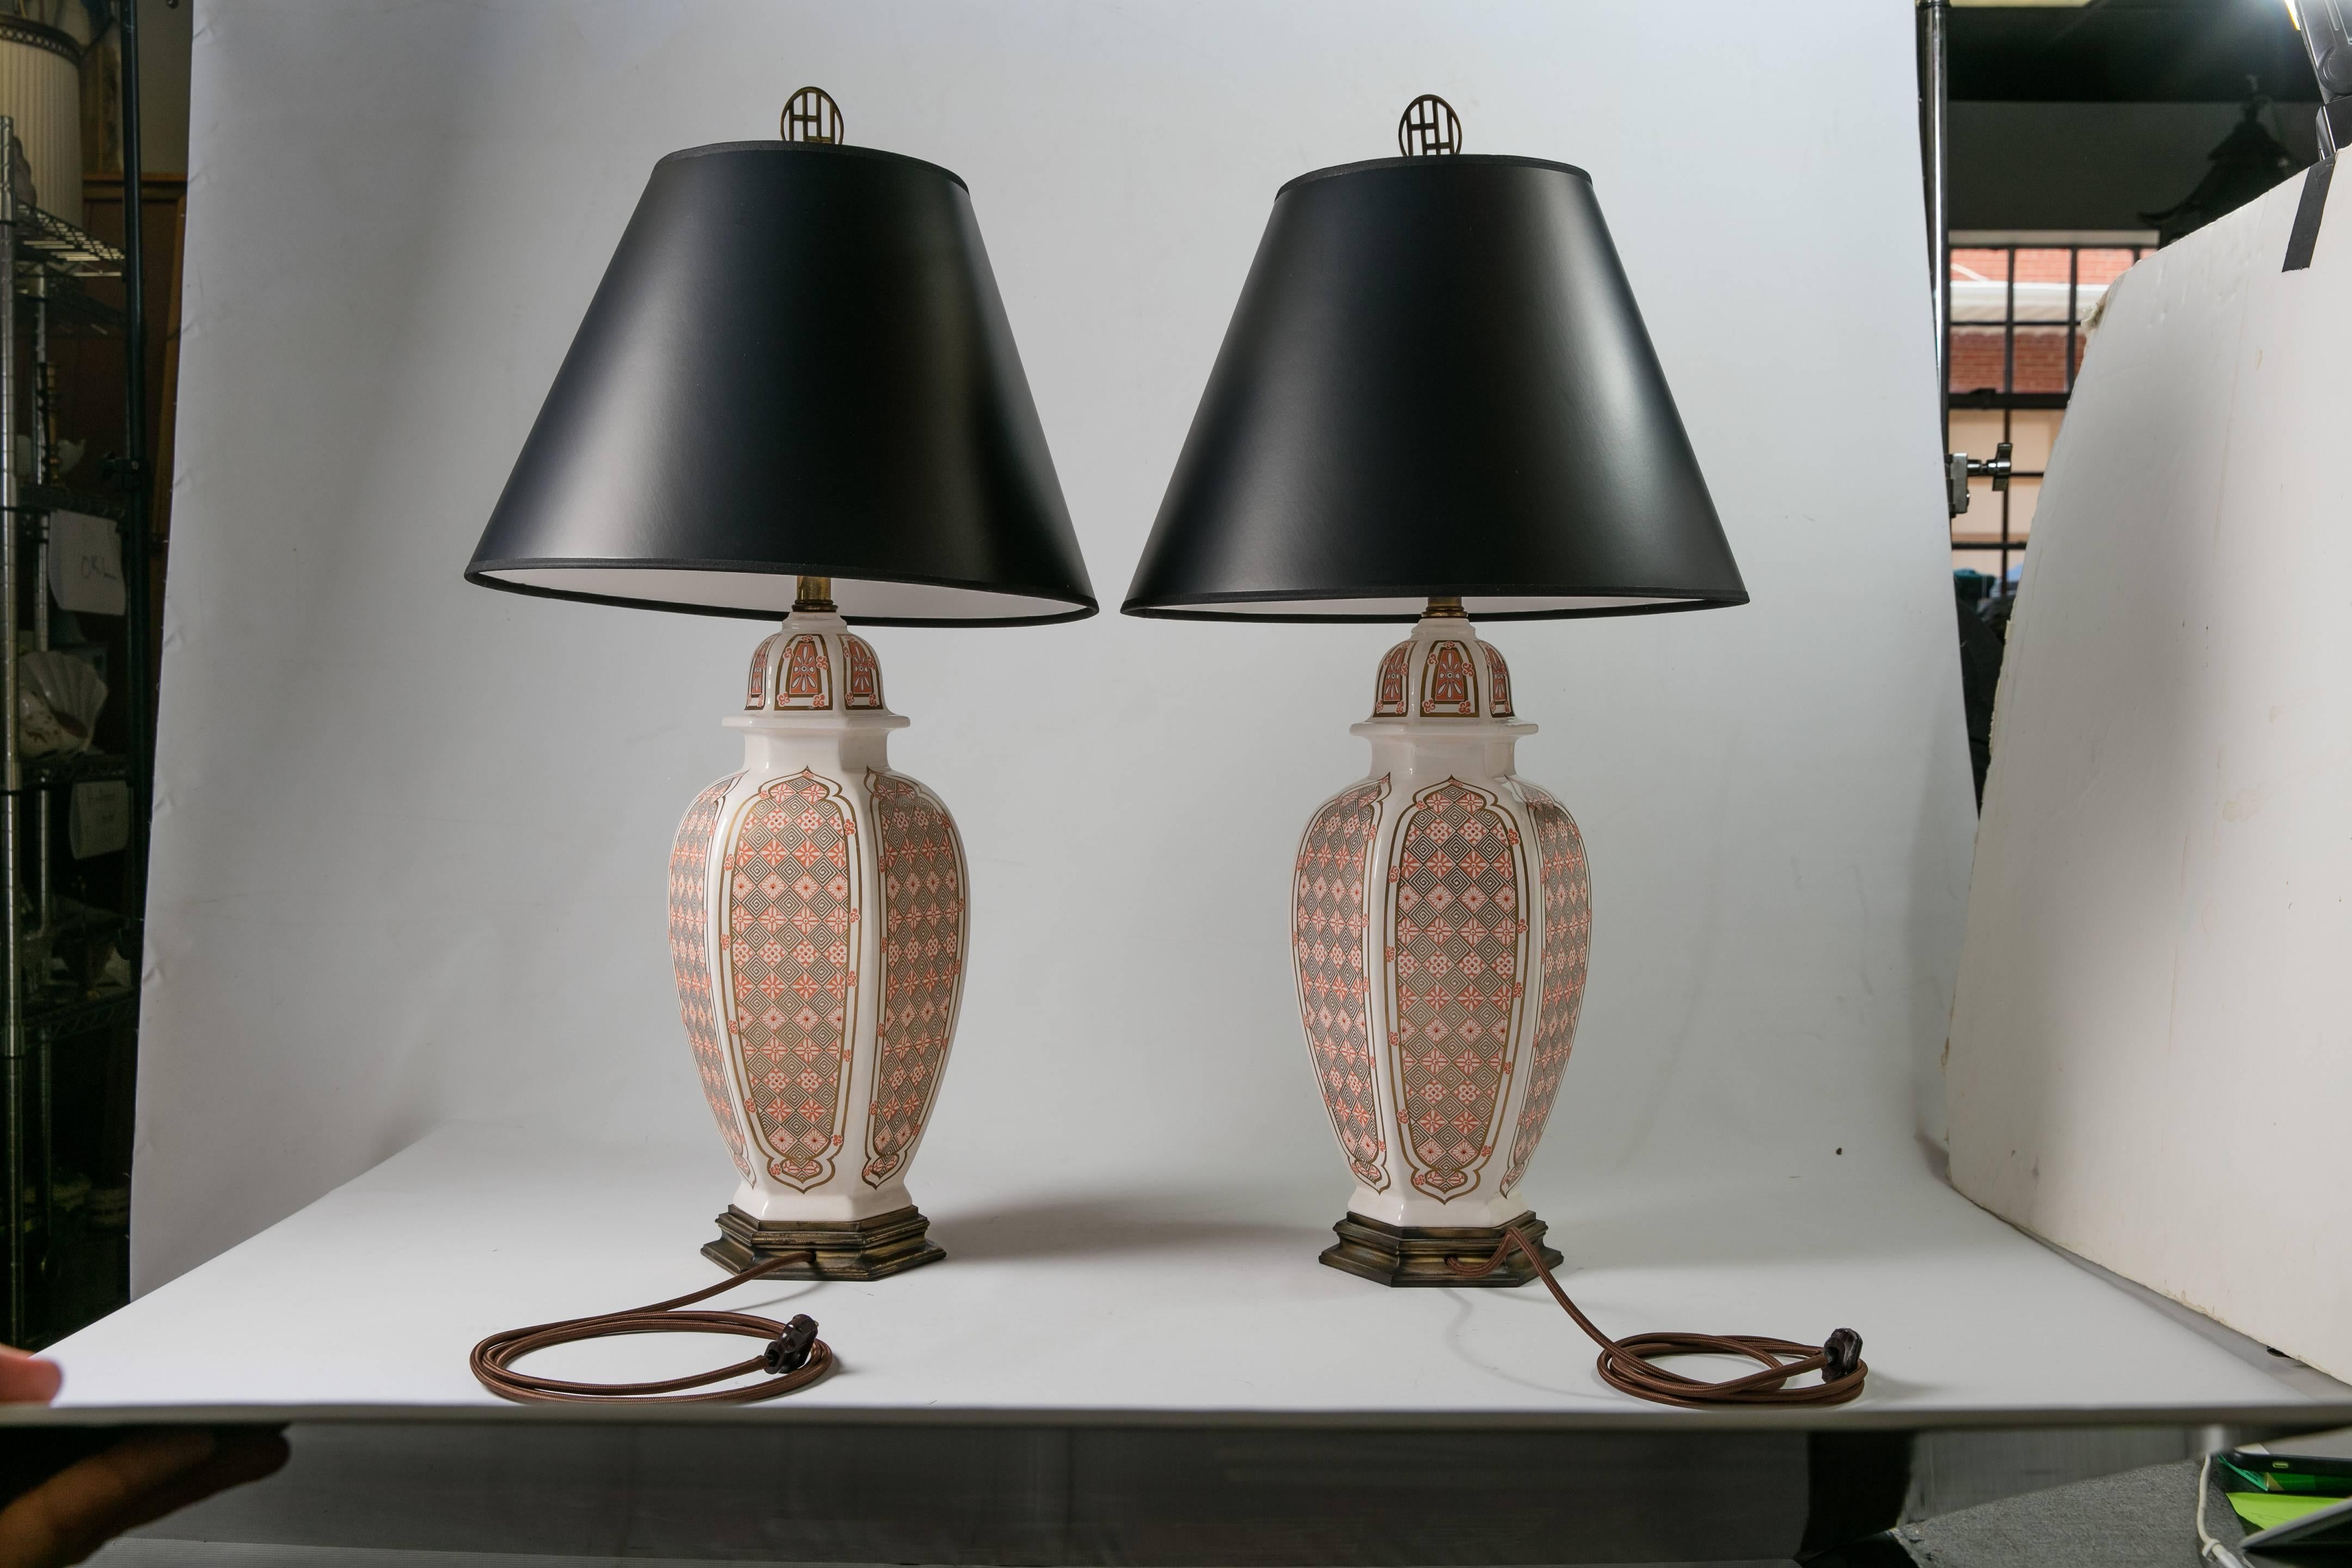 Pair of 1960s ceramic table lamps with a graphic Gothic-style print in orange and gold. The lamps feature a brass-colored metal bases and black paper shades. Newly wired with silk cords; 60W-max bulb per lamp. Shades, 9